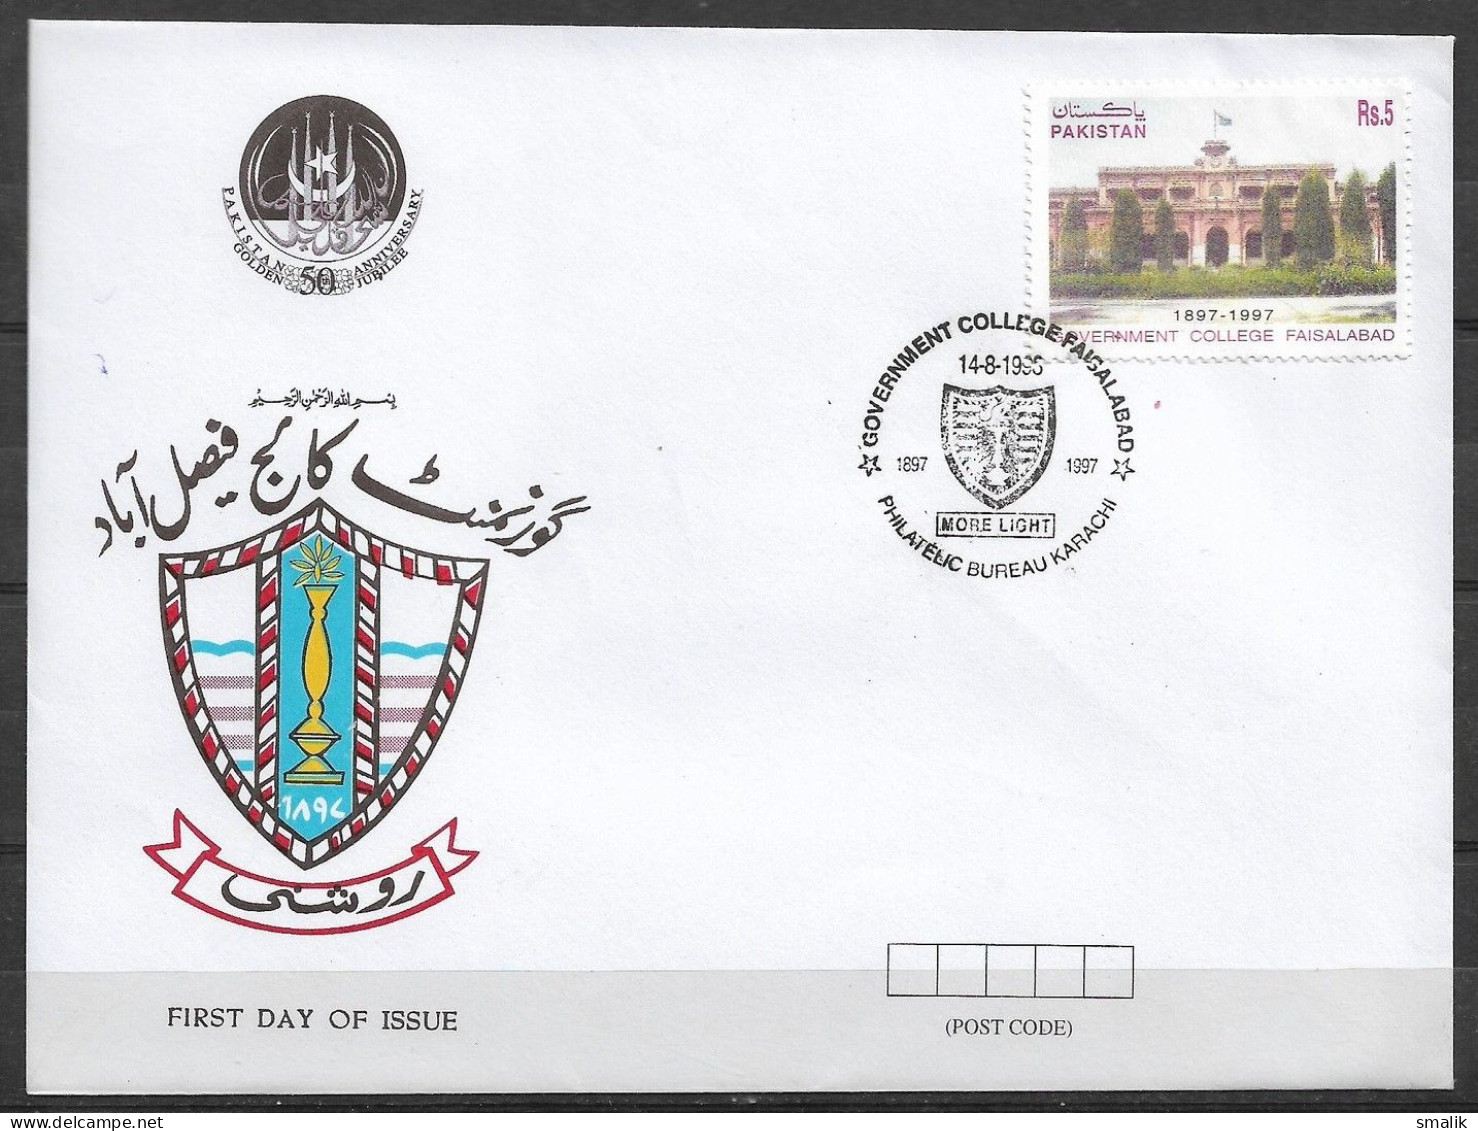 PAKISTAN 1997 FDC - Government College Faisalabad 100 Years, Education, First Day Cover - Pakistan